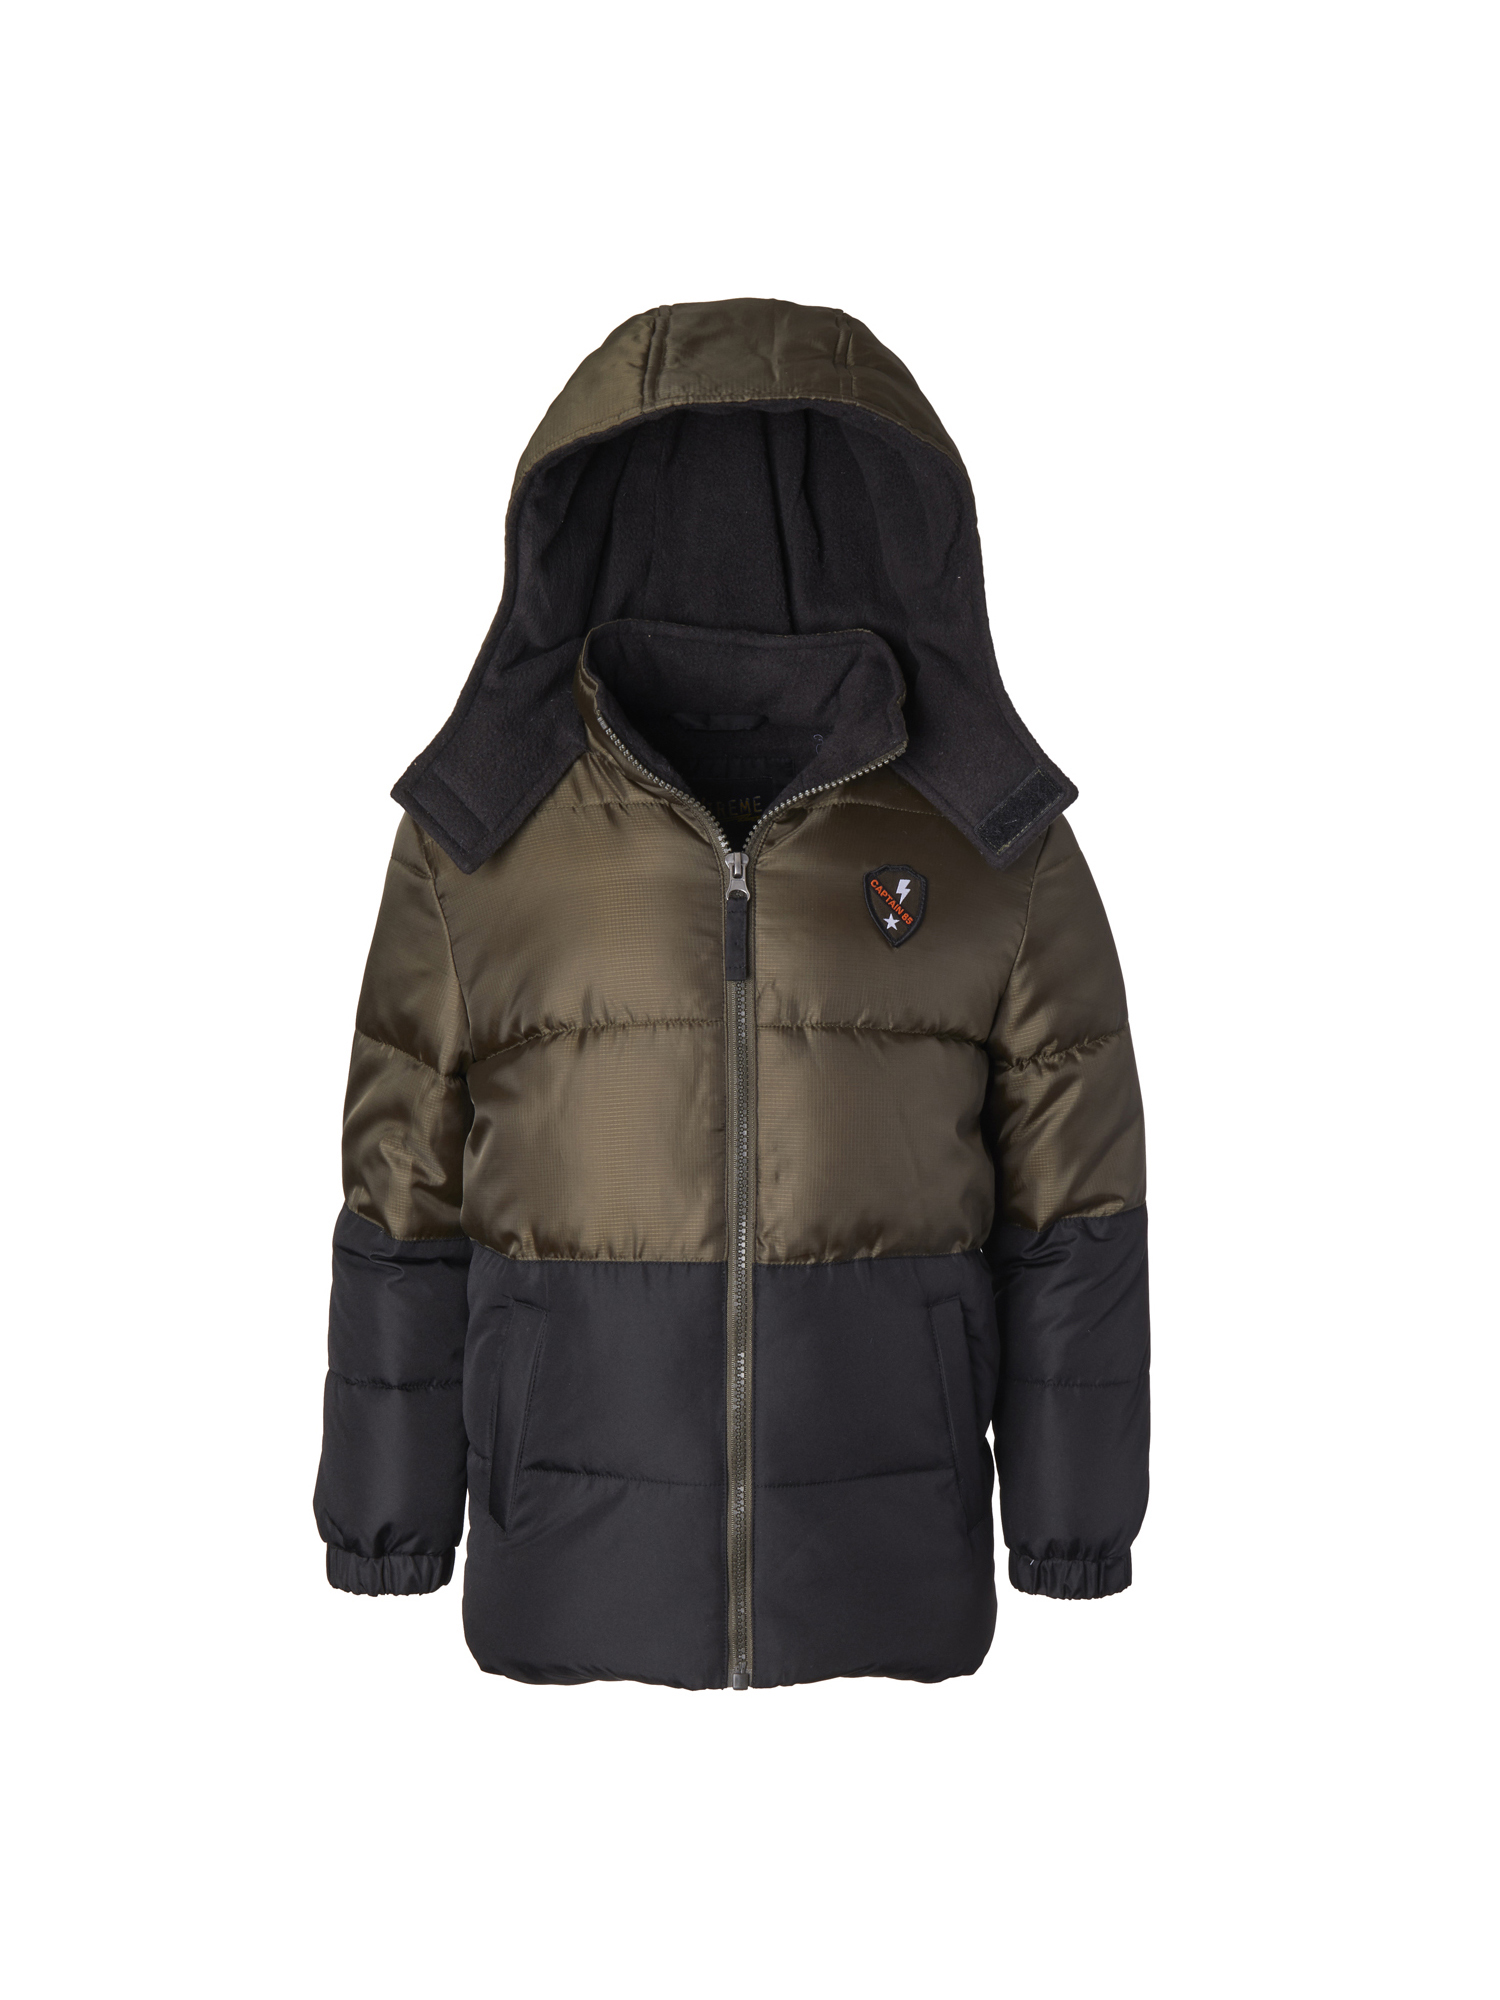 iXtreme Colorblock Puffer Jacket with Front Patch (Little Boys & Big Boys) - image 3 of 3